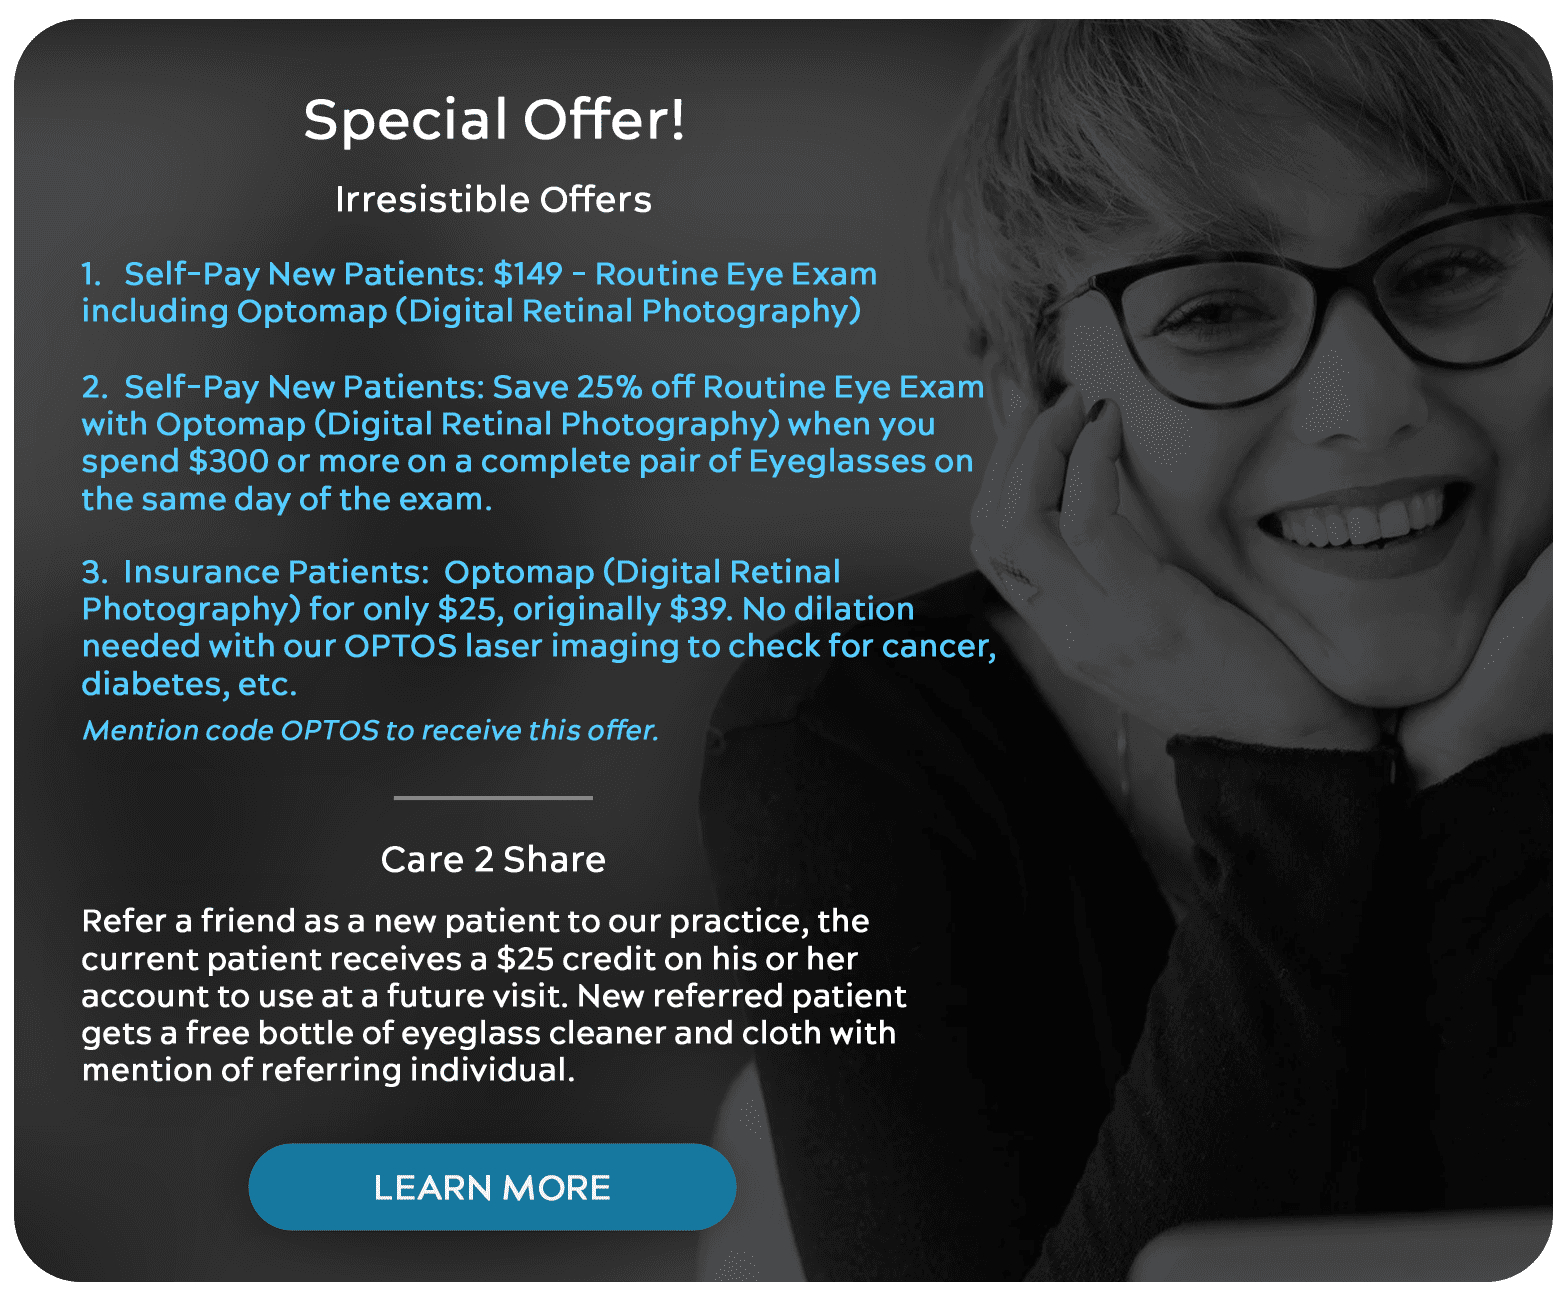 Special Offer!